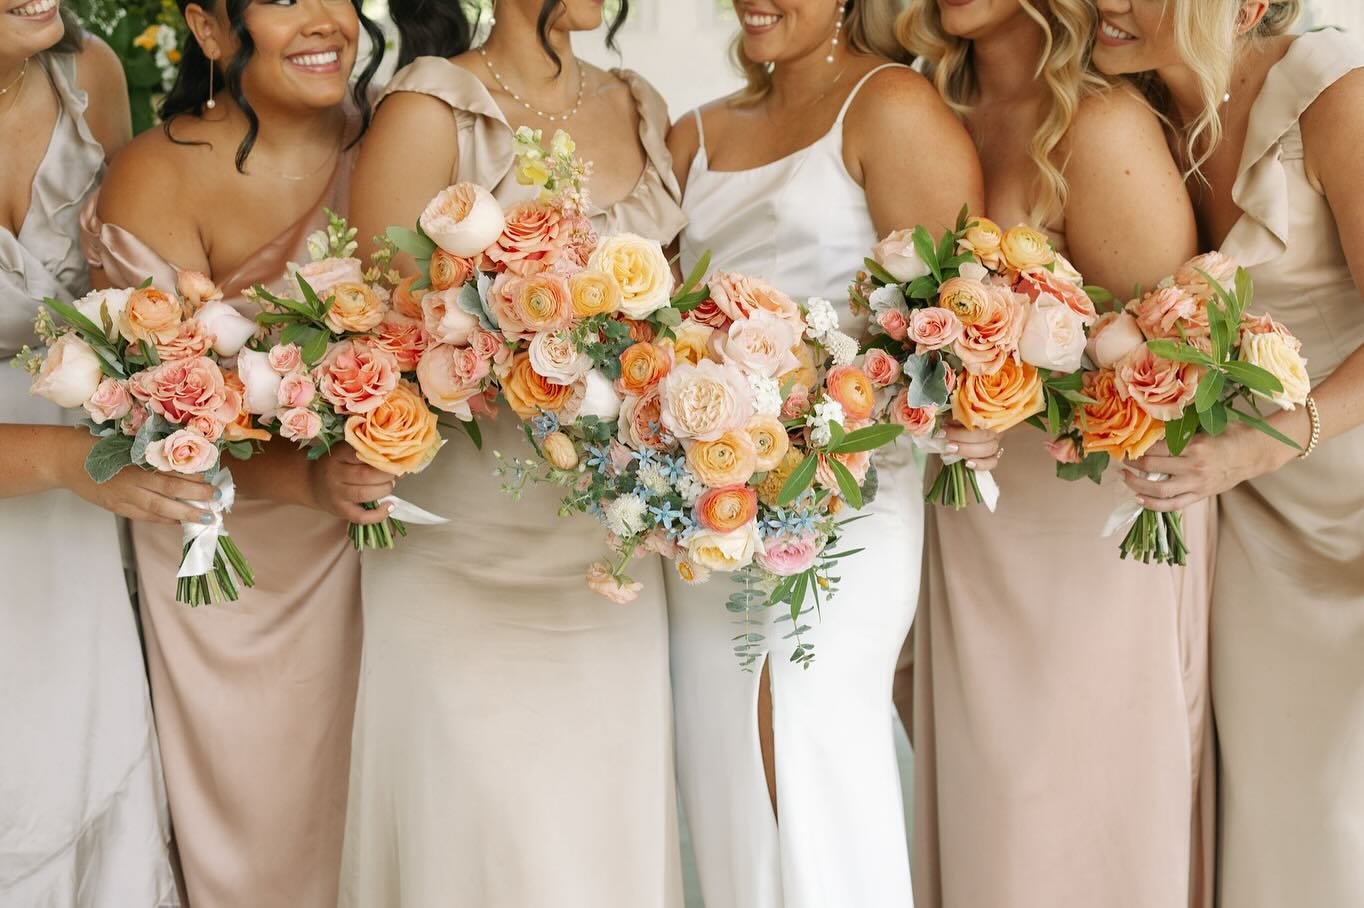 These bouquets needed their own spot on our feed because, well, just look at them 🤩

We hope your Wednesday was filled with this much beauty!!!

xoxo💋

Glass Chapel

photo / @cassidyelise.co
florist / @robynsflowergarden
DJ / @redlinedjok 
dresses 